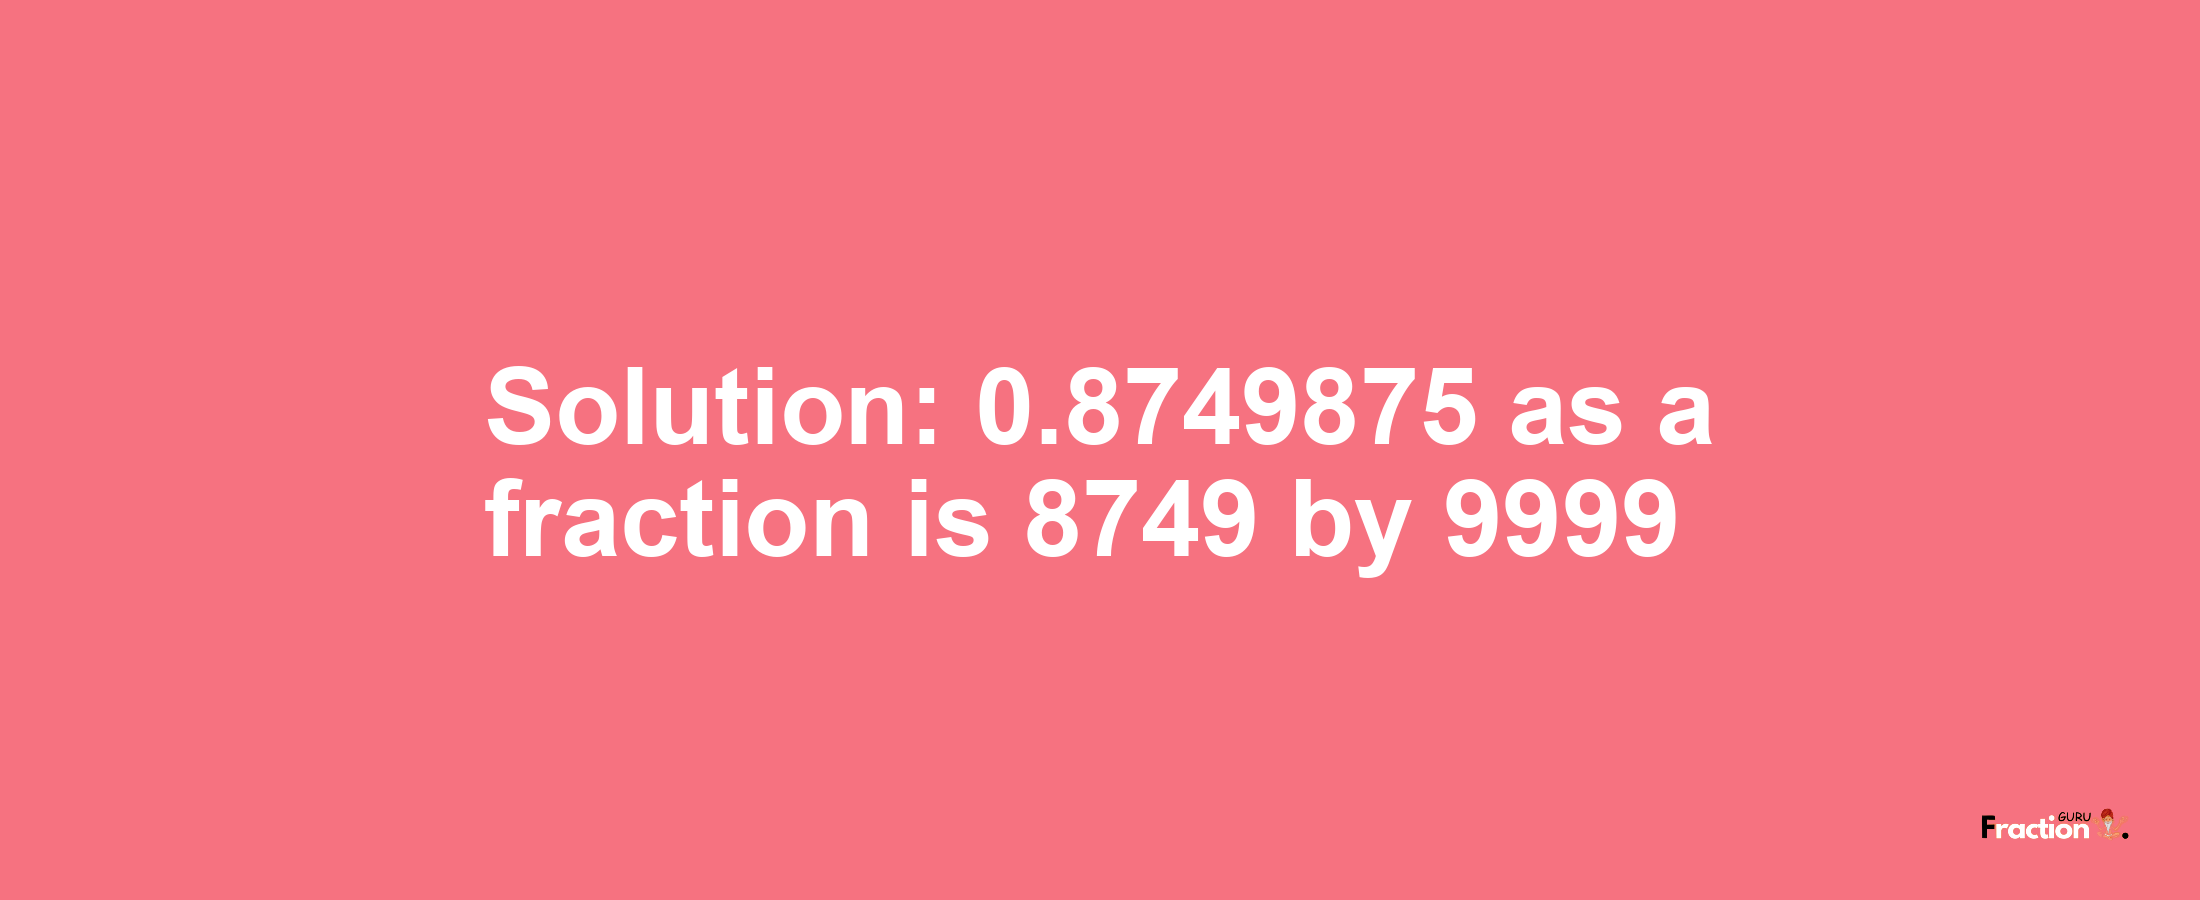 Solution:0.8749875 as a fraction is 8749/9999